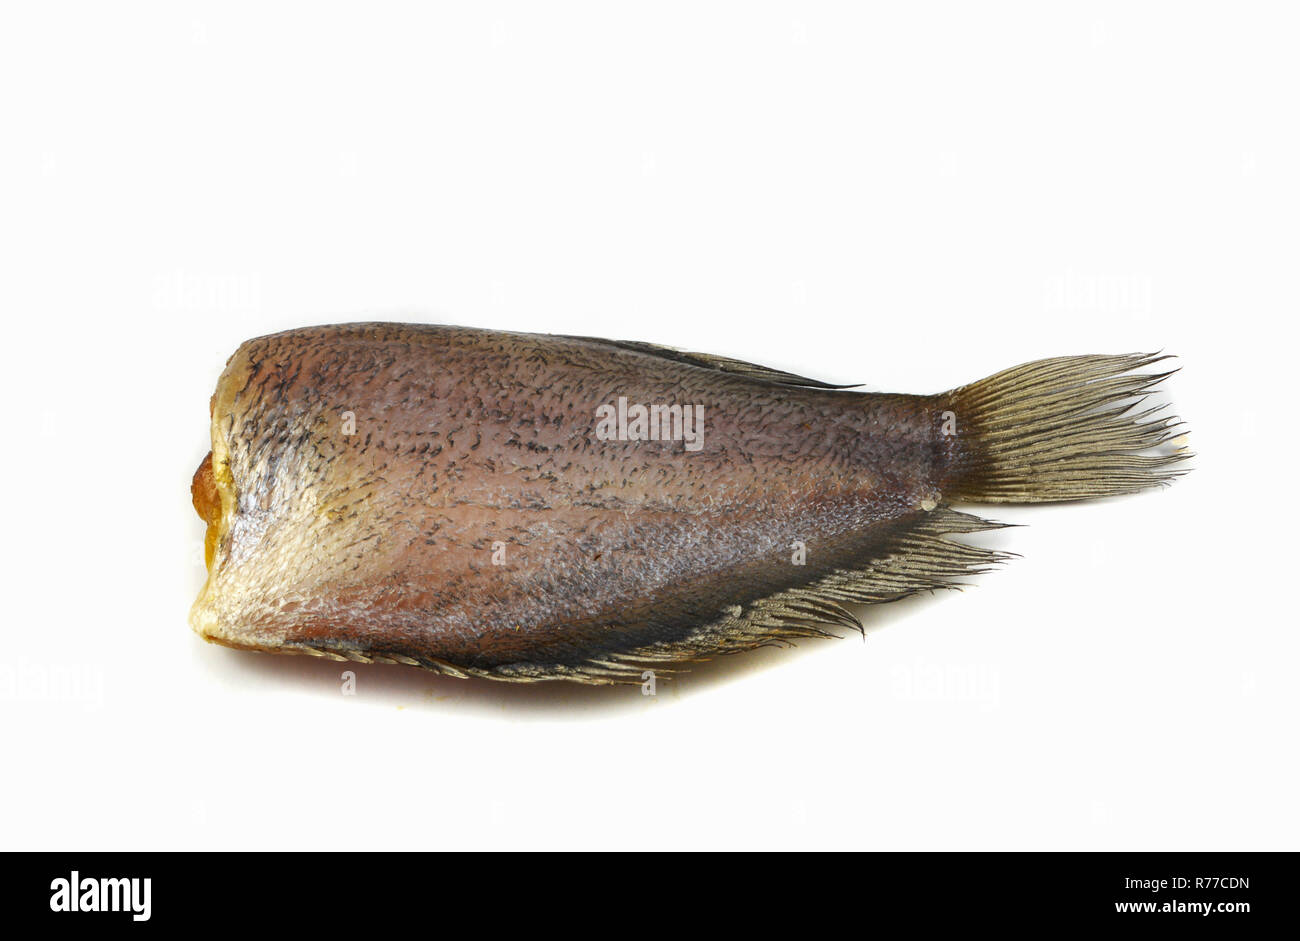 sun dried fish / trichogaster pectoralis fish dried with spawn isolated on white background Stock Photo